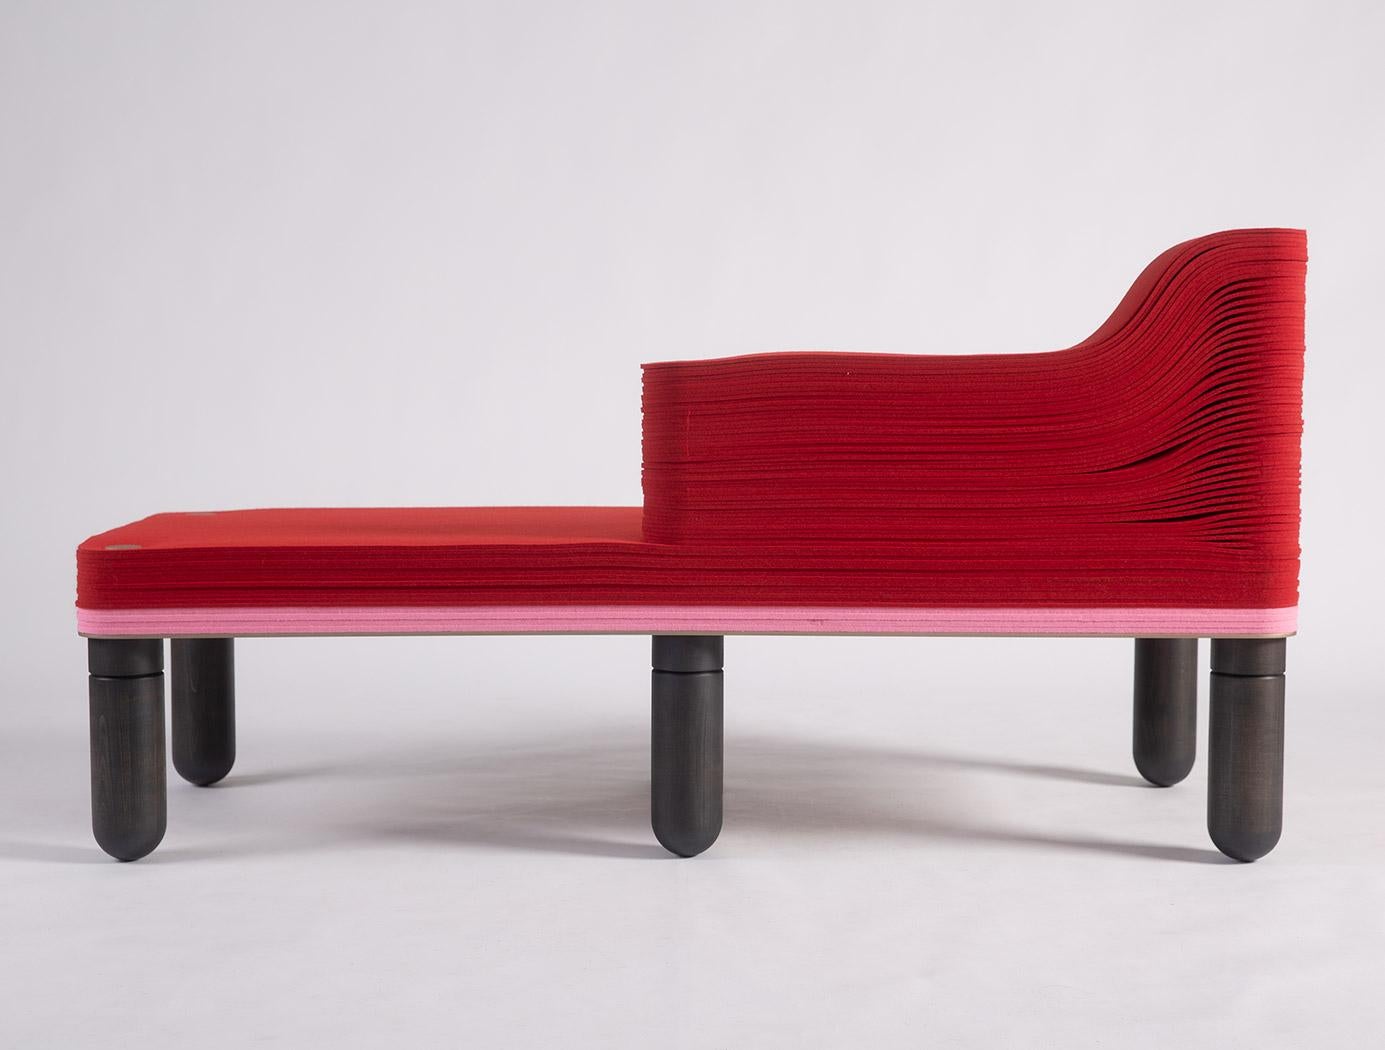 Machine-Made Madame G, Felt and Wood Chaise Lounge, Drake / Anderson in Stackabl For Sale